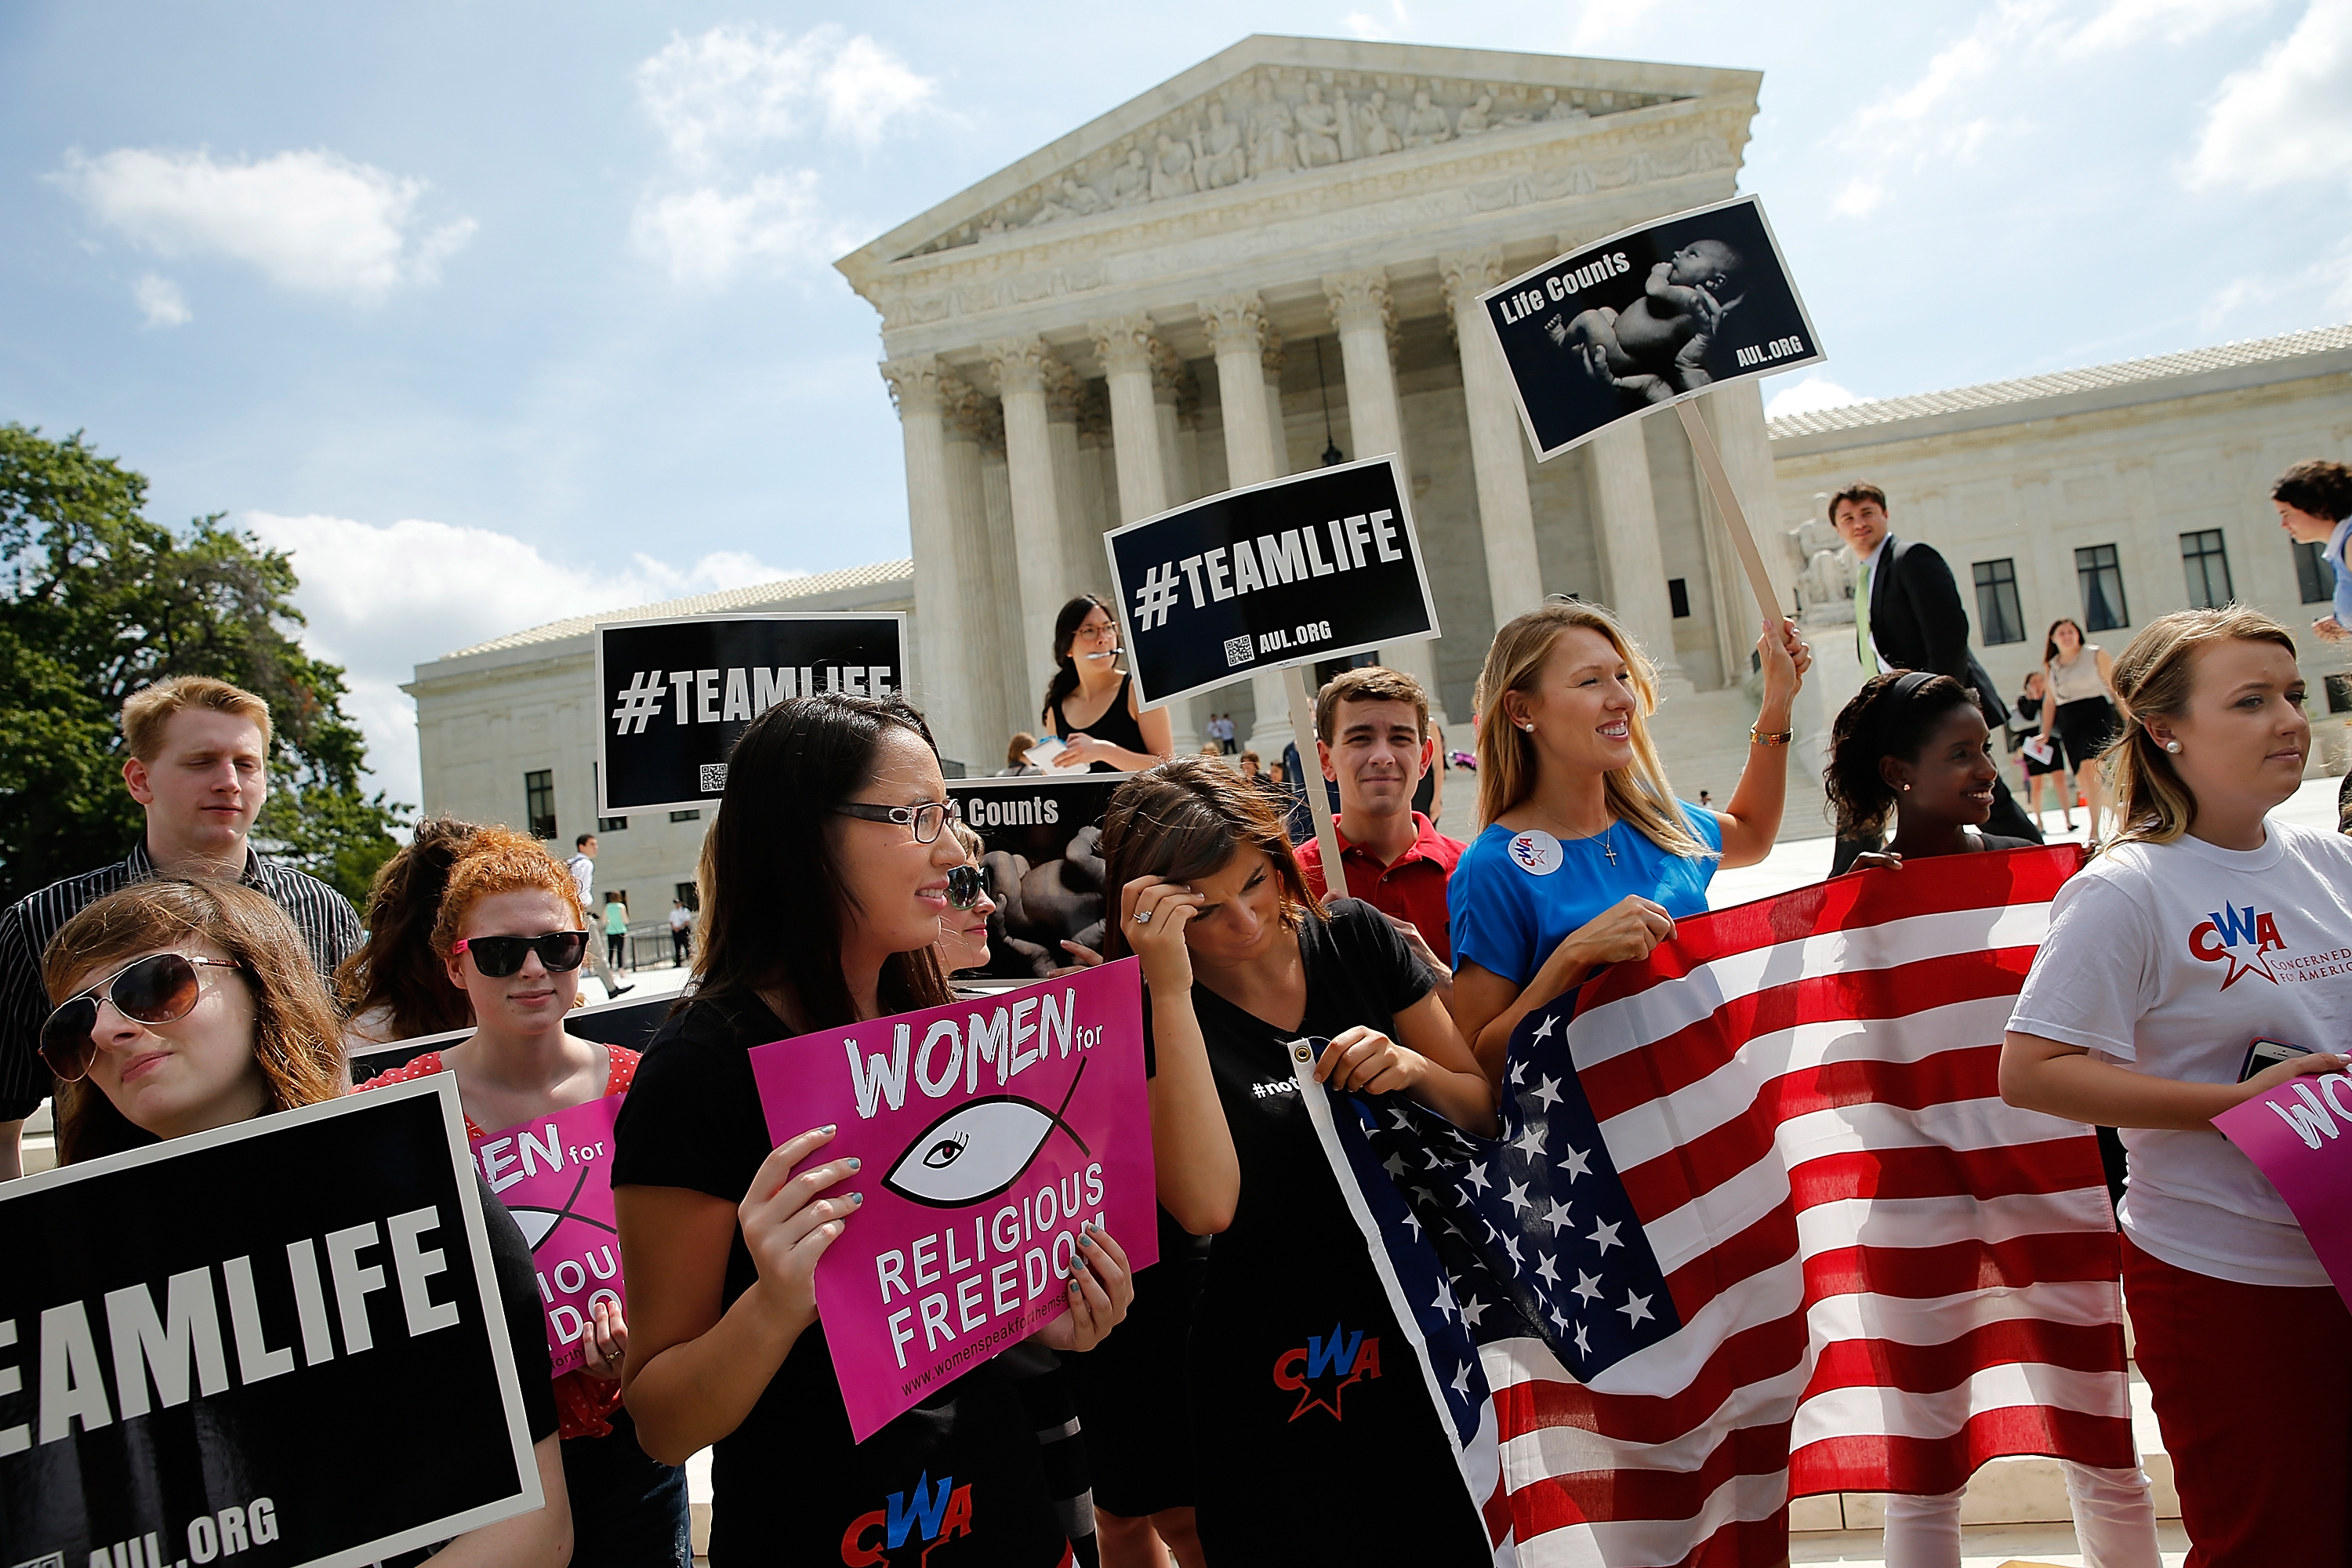 Pro-life activists gather outside the U.S. Supreme Court June 26, 2014 in Washington, DC. (Win McNamee—Getty Images)